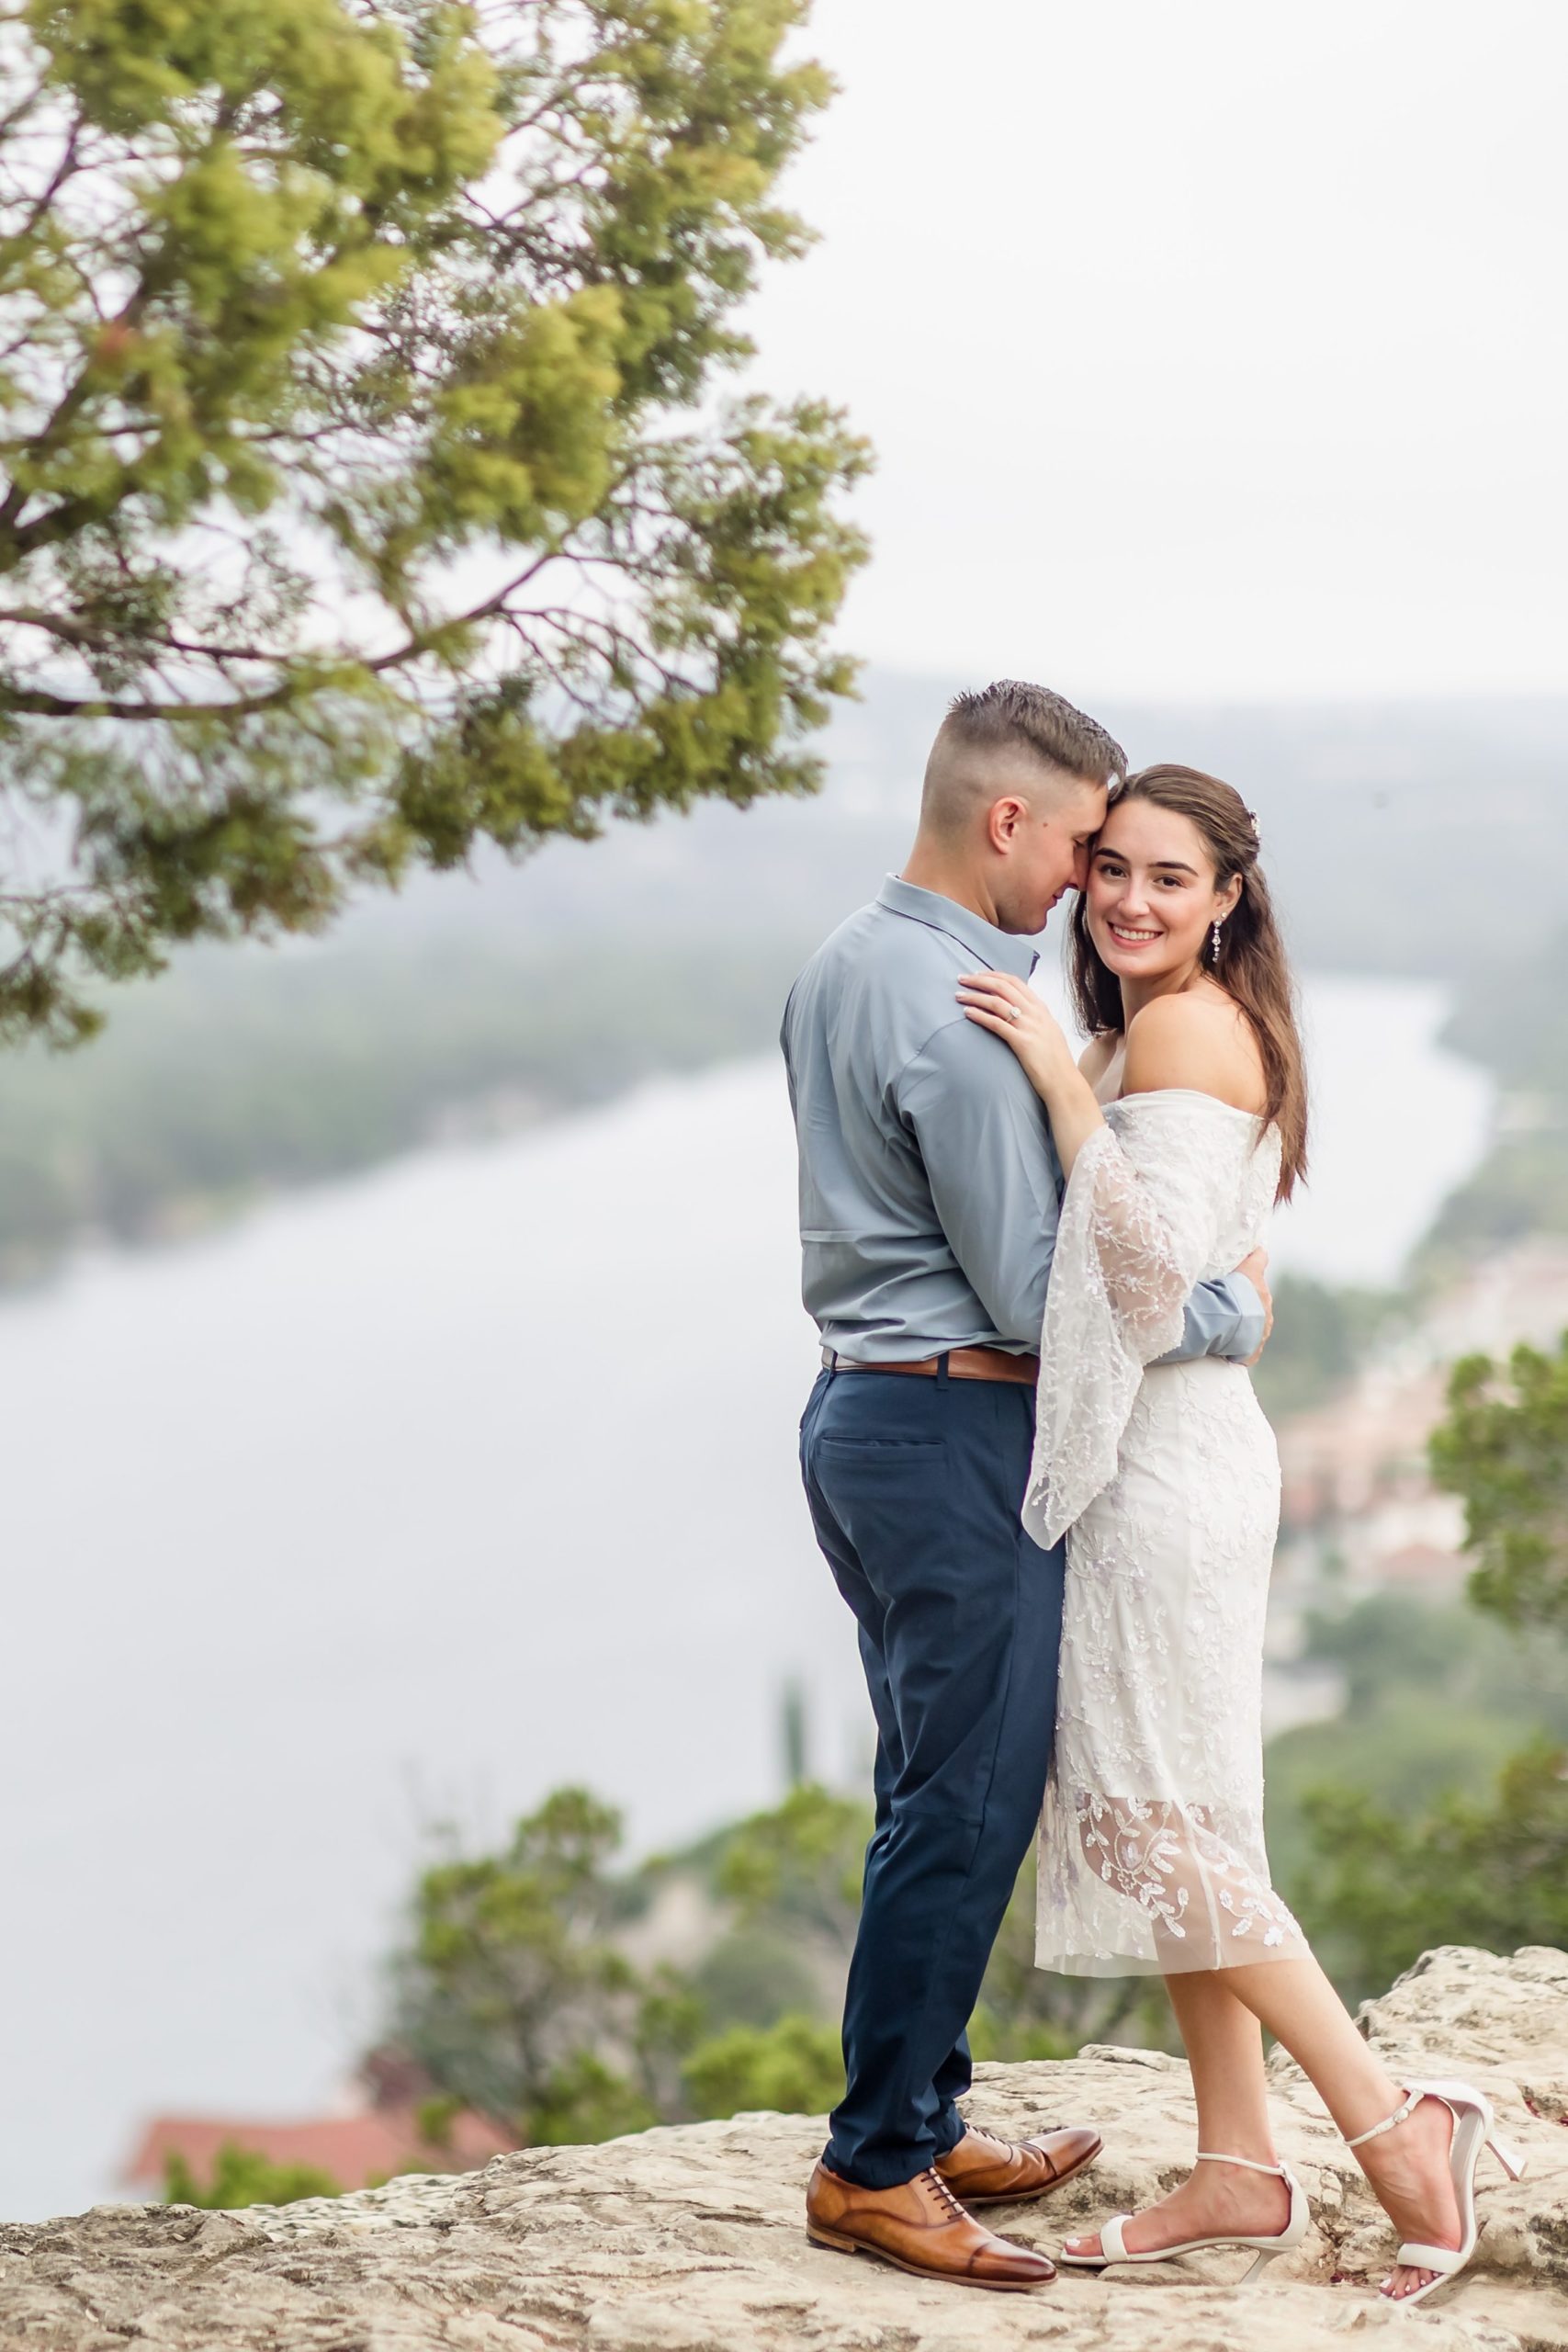 Couple embrace during their engagement session at Mount Bonnell in Austin, Texas.